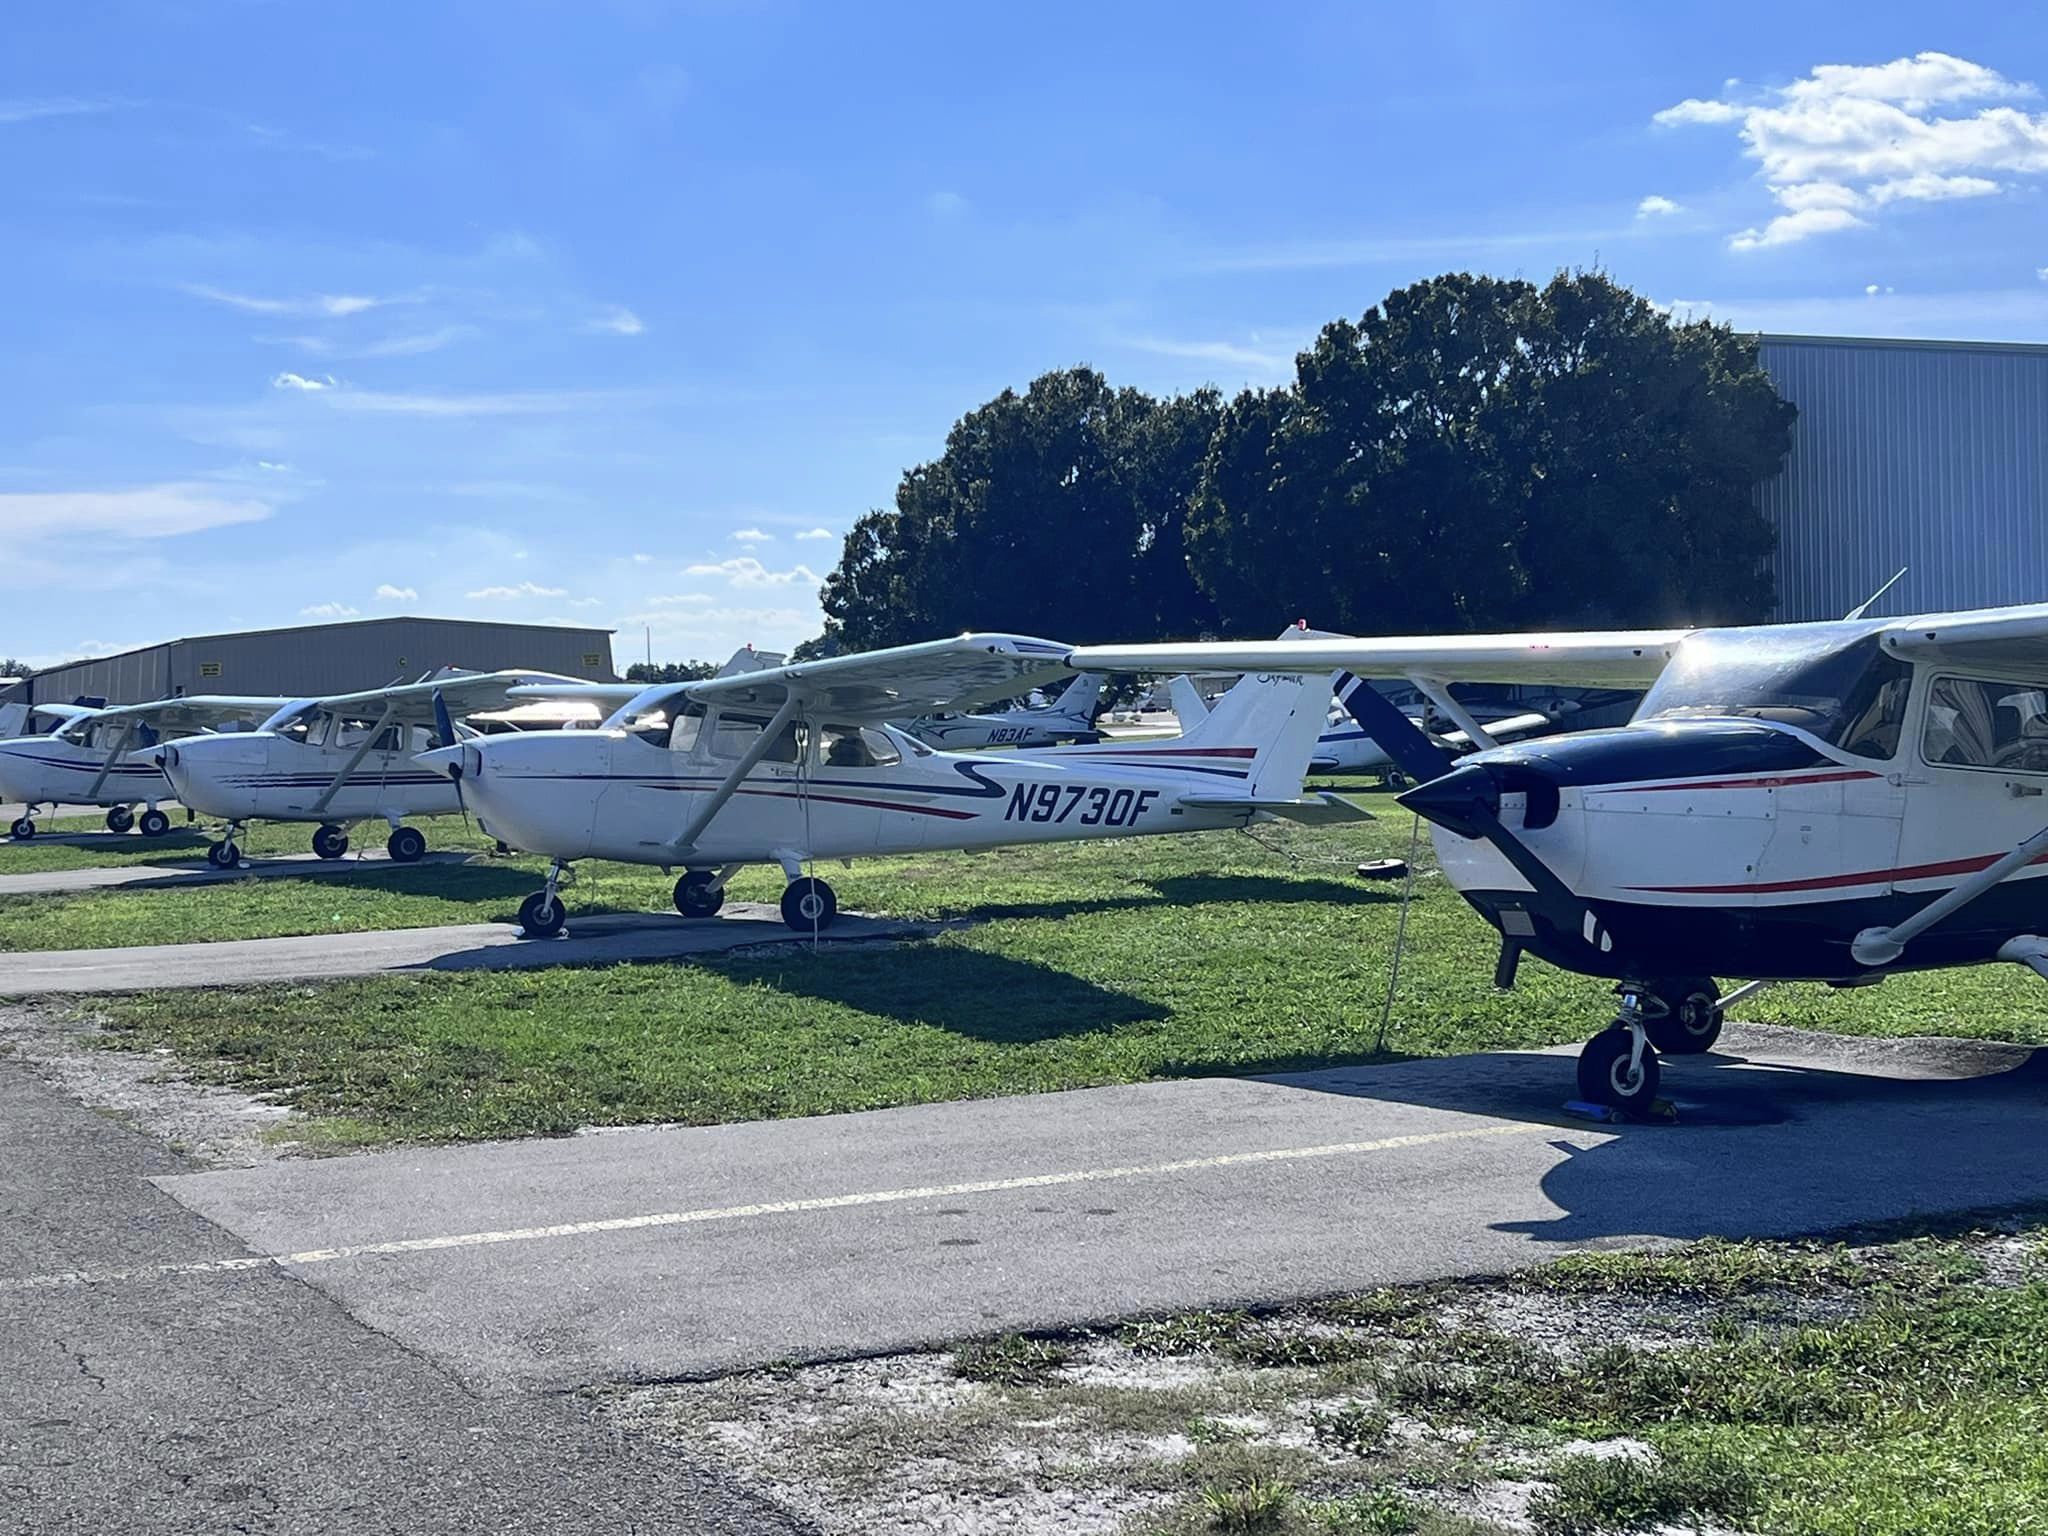 FLORIDA  FLIGHT SCHOOL  STUDENT  DISABLED  MULTIPLE  AIRCRAFT  AFTER  BEING  DENIED  A  SOLO  FLIGHT .